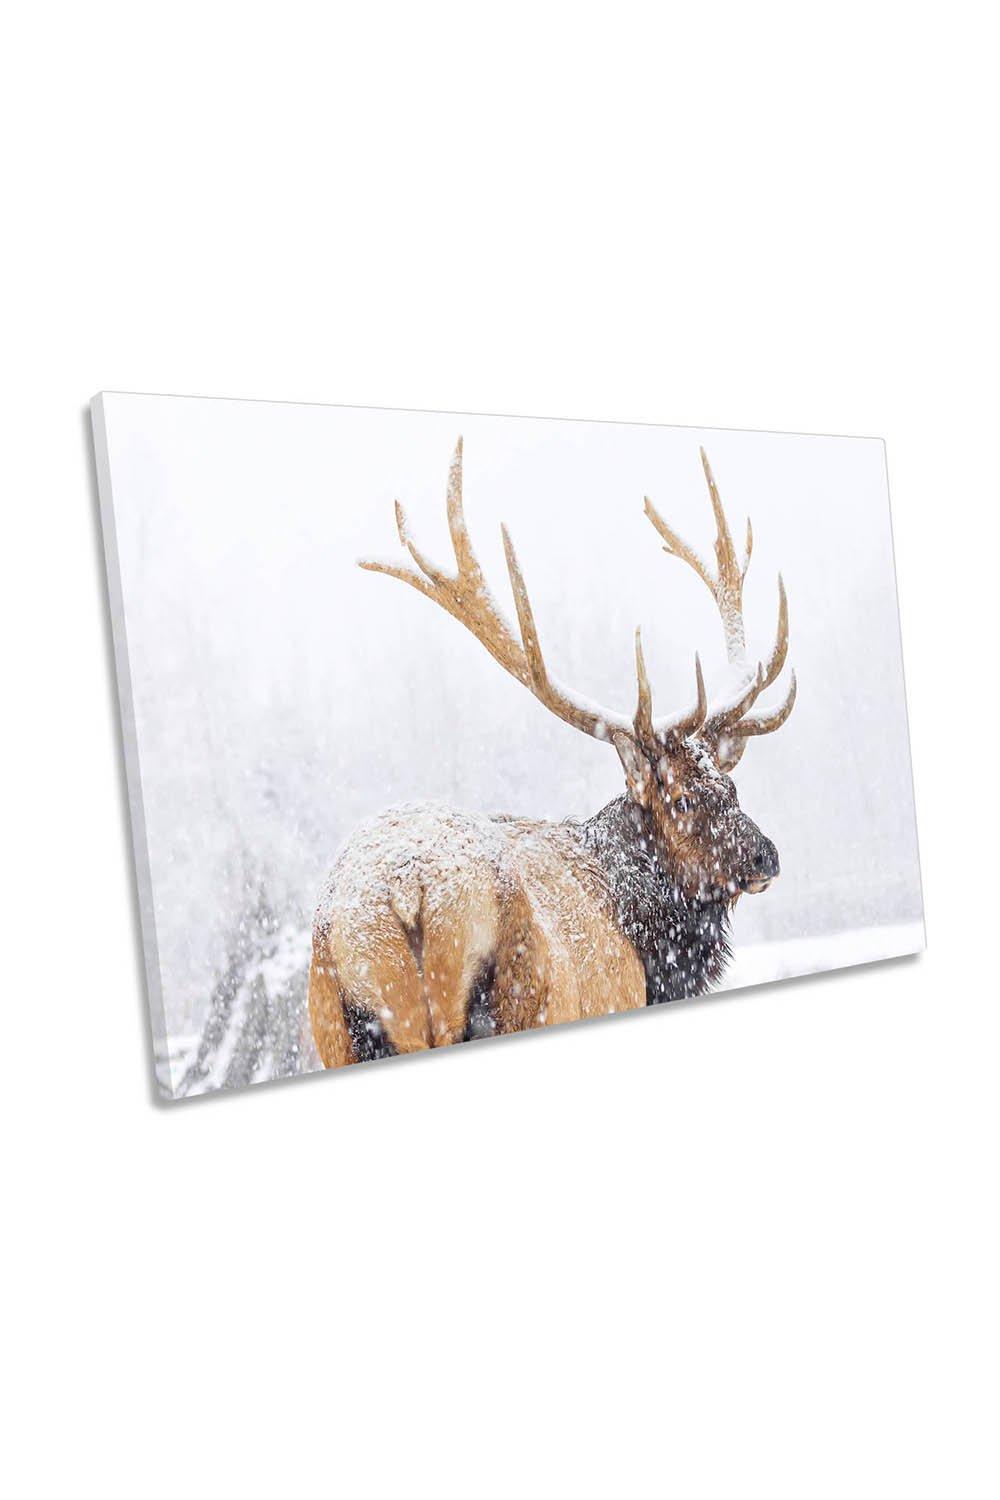 Winter Stag Deer Snow Canvas Wall Art Picture Print